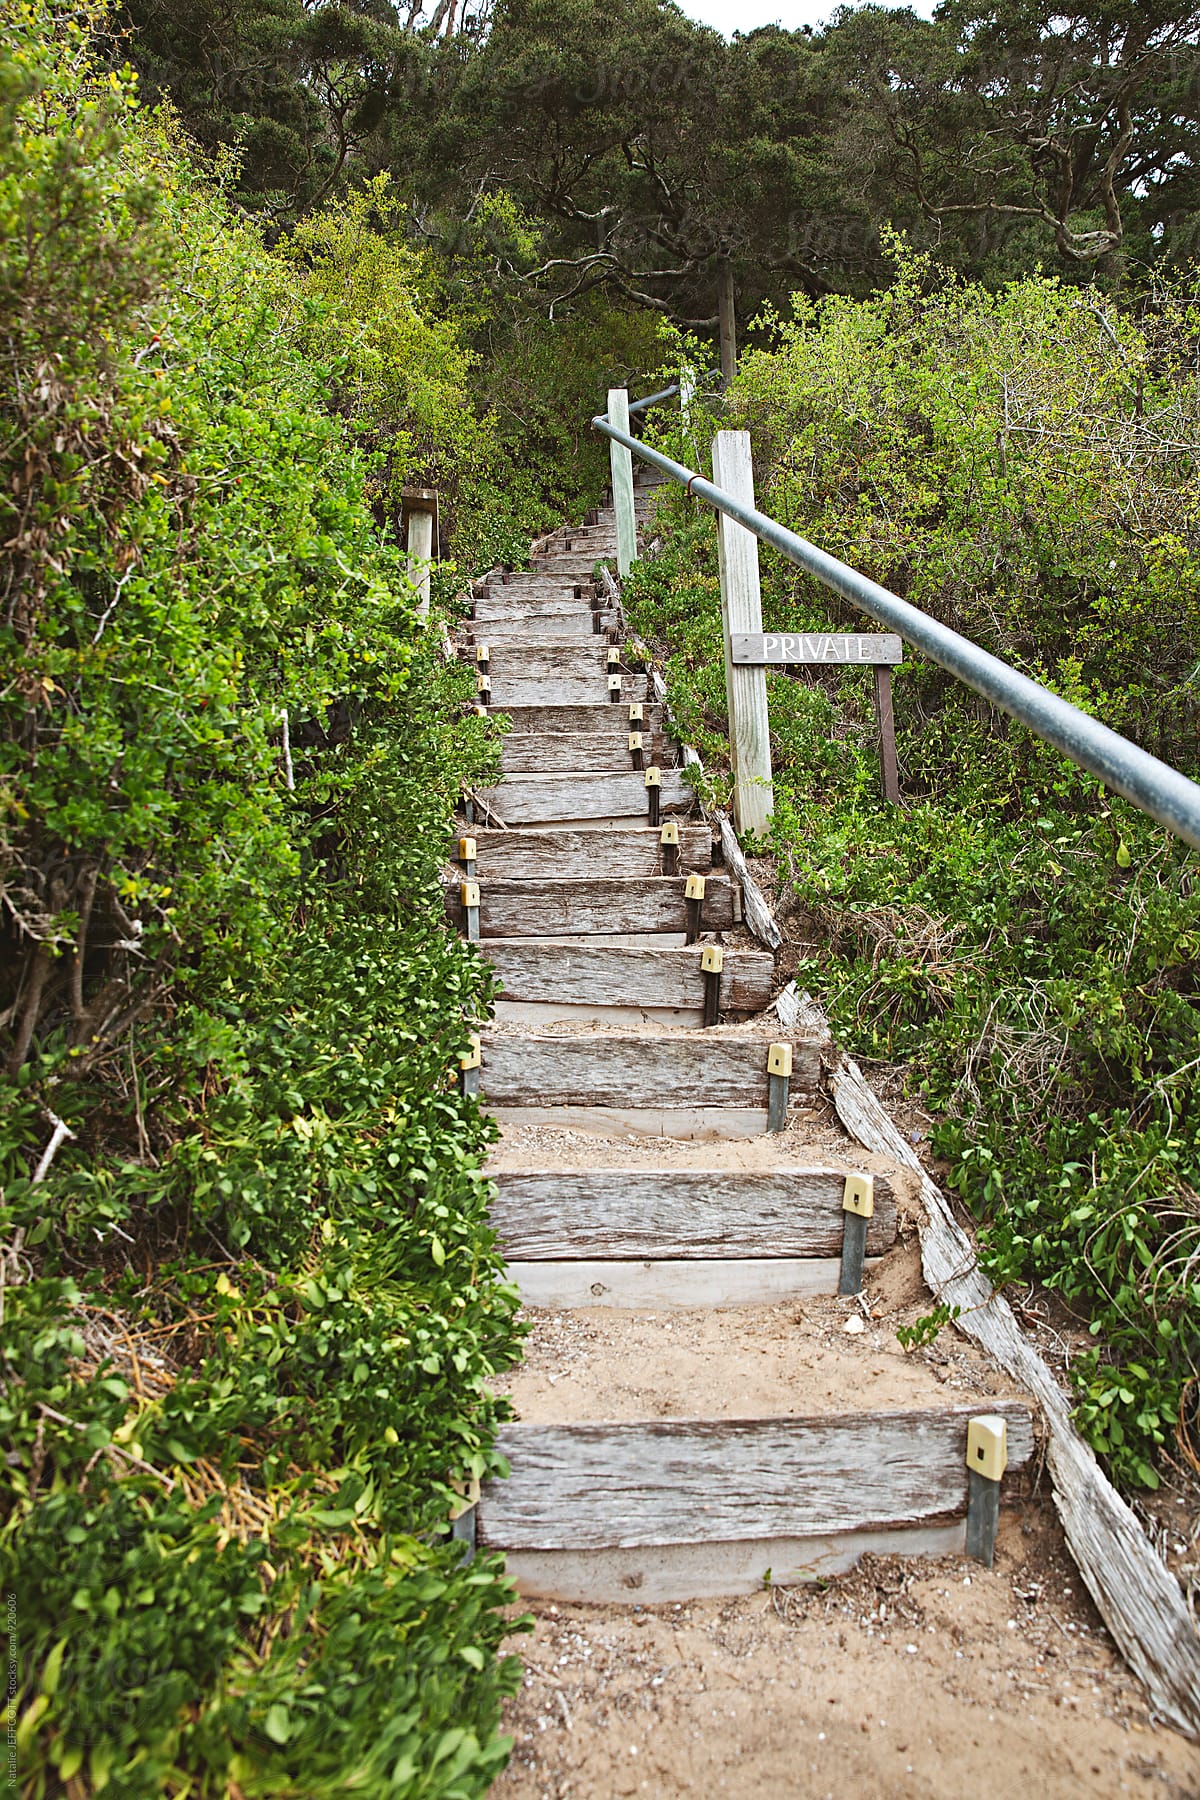 Stairs on the beach leading to a private property in Portsea, Victoria, Australia